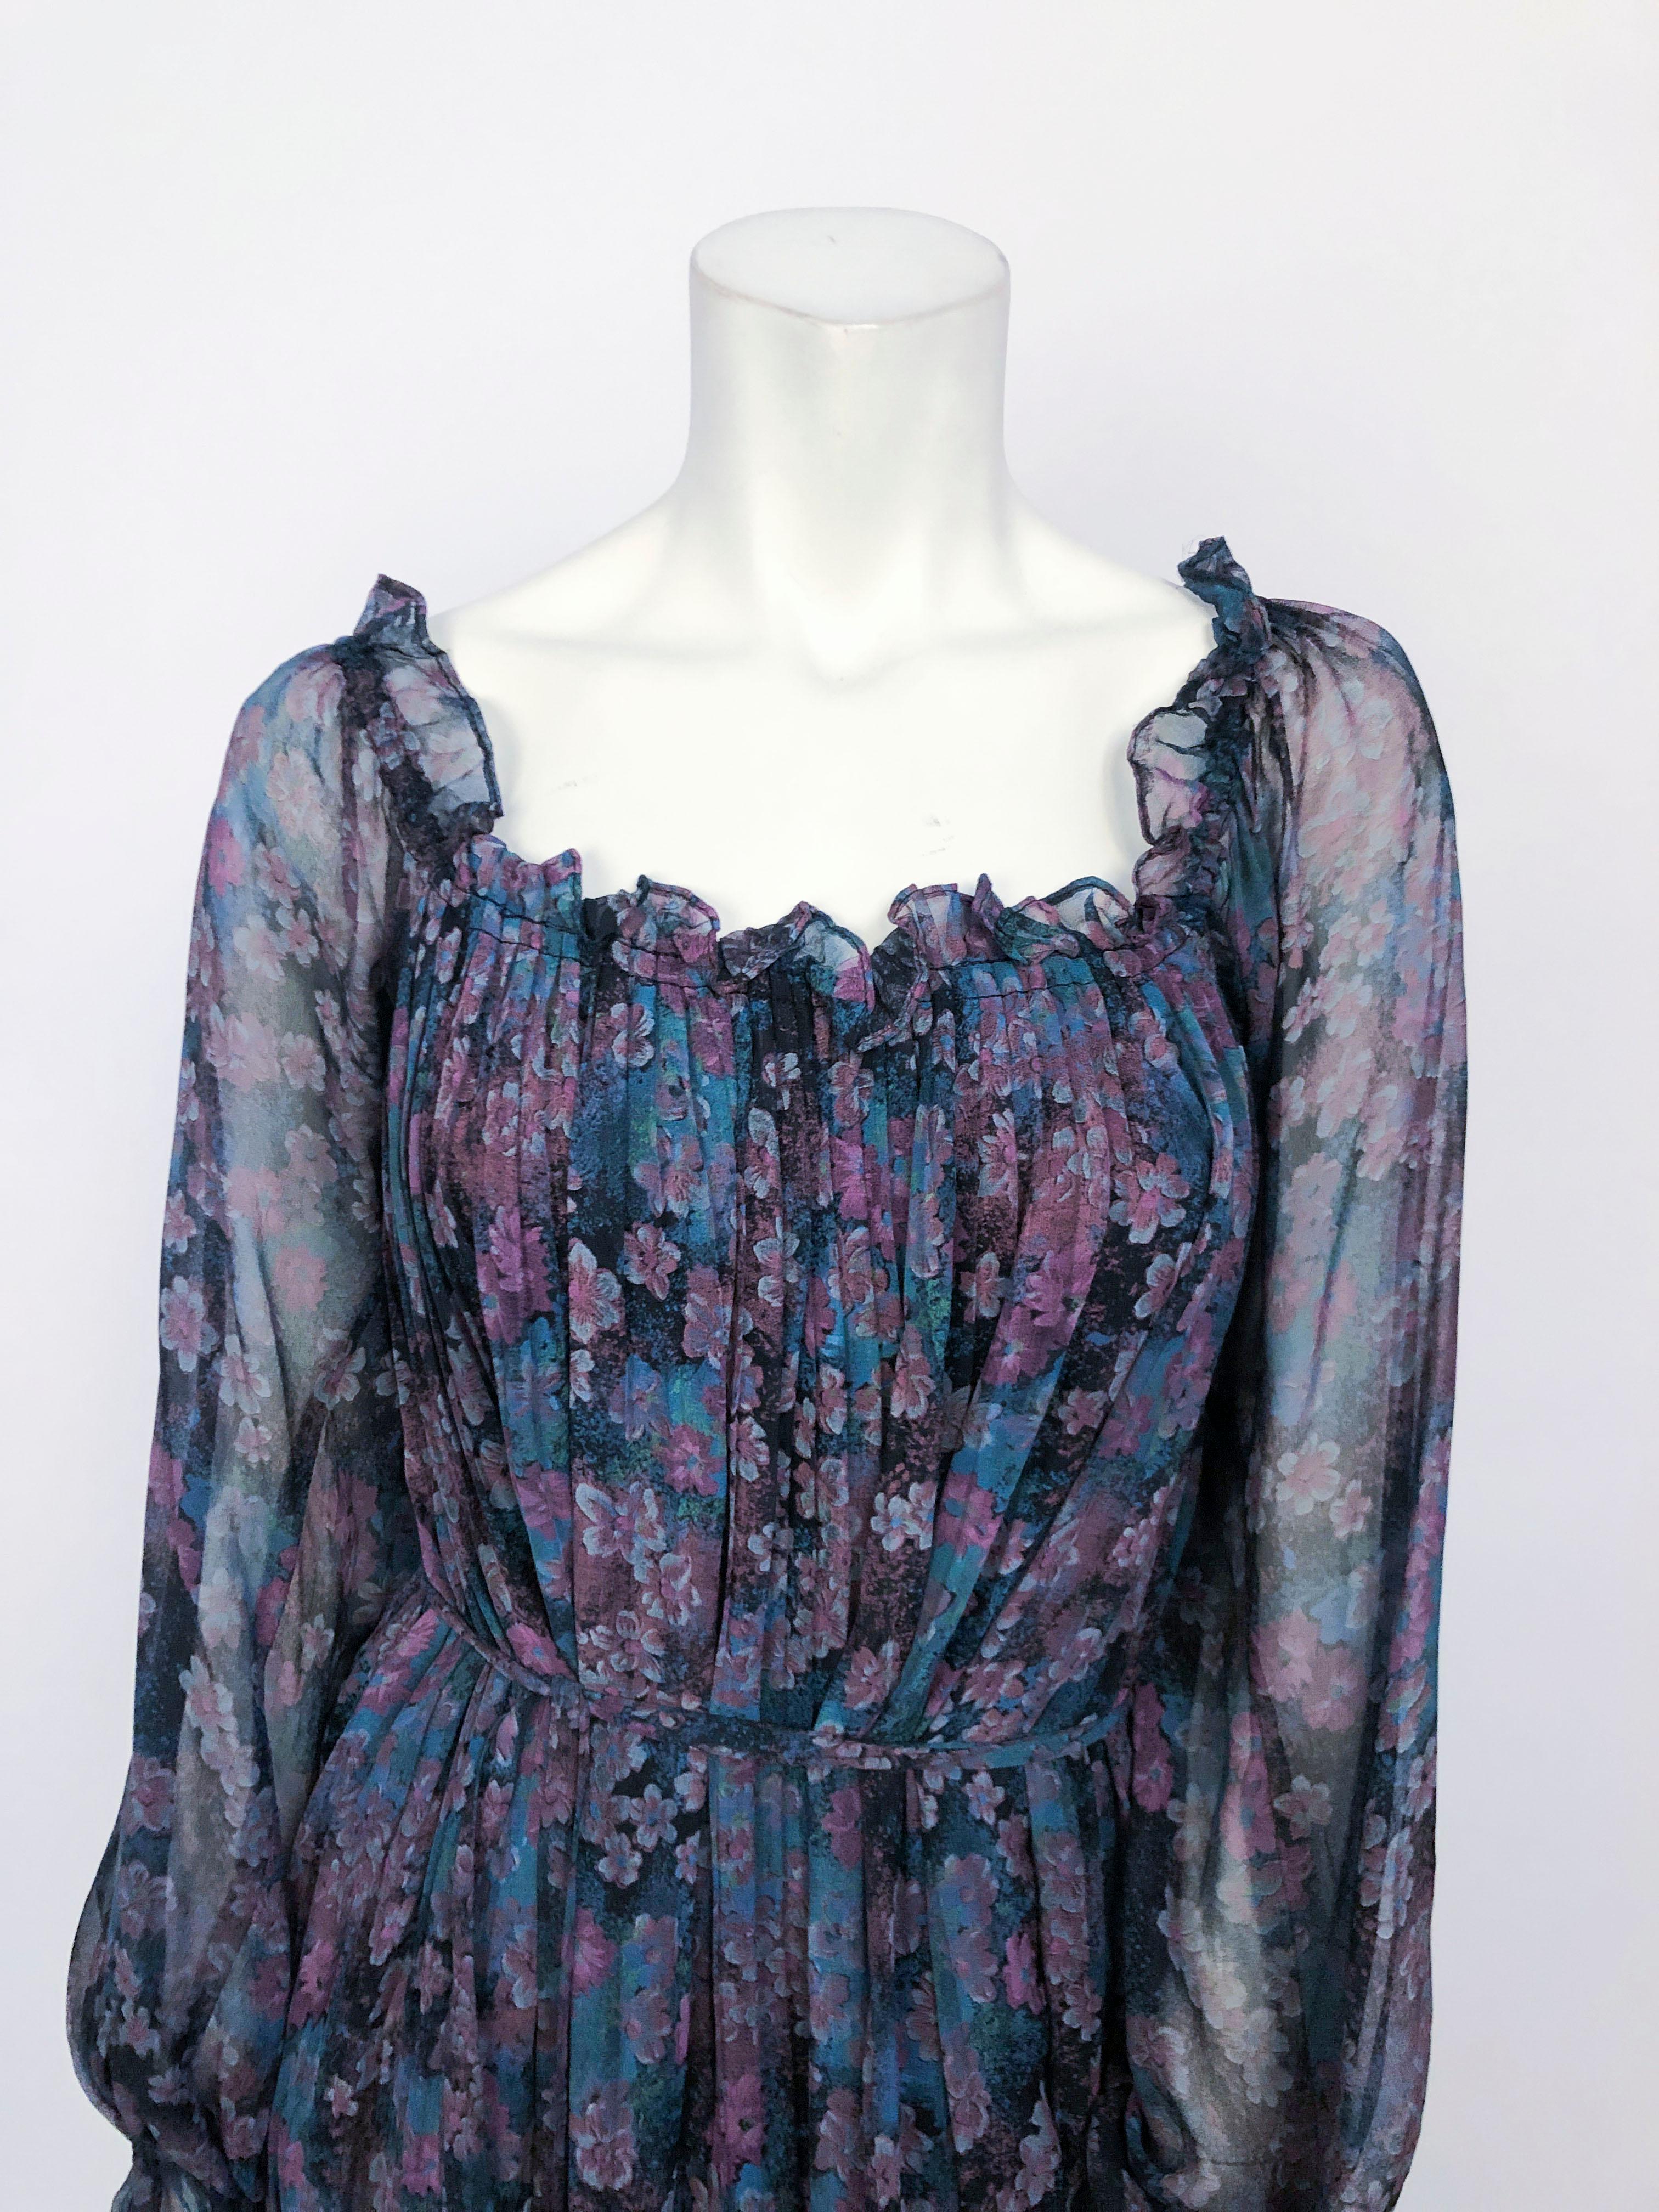 Printed bohemian dress featuring a floral print in violets and blues. This dress is flowy, fully lined, and has peasant sleeves finished with an elasticated ruffled cuff. The neckline is extremely elasticated meaning that it could be styled over the